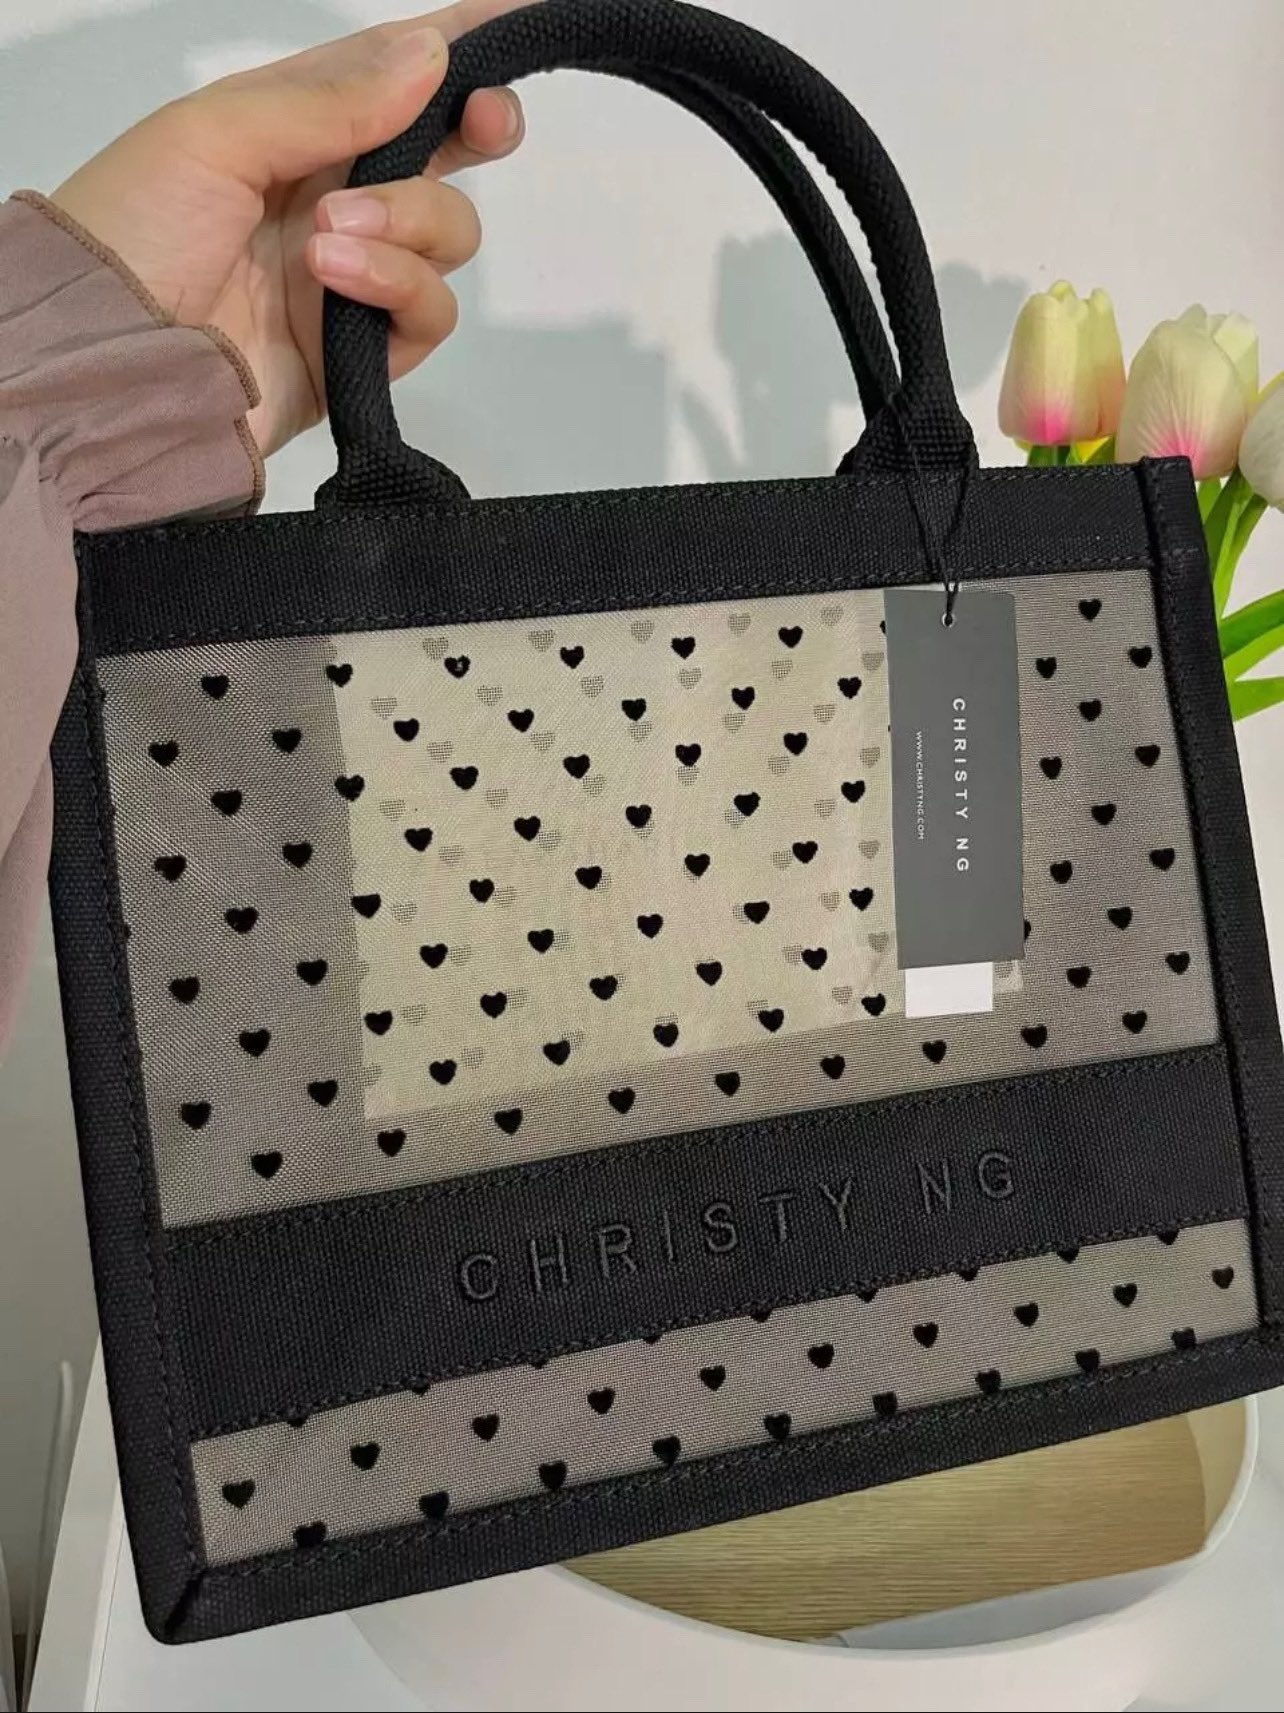 Unboxing  Christy Ng Tote Bag 2021 